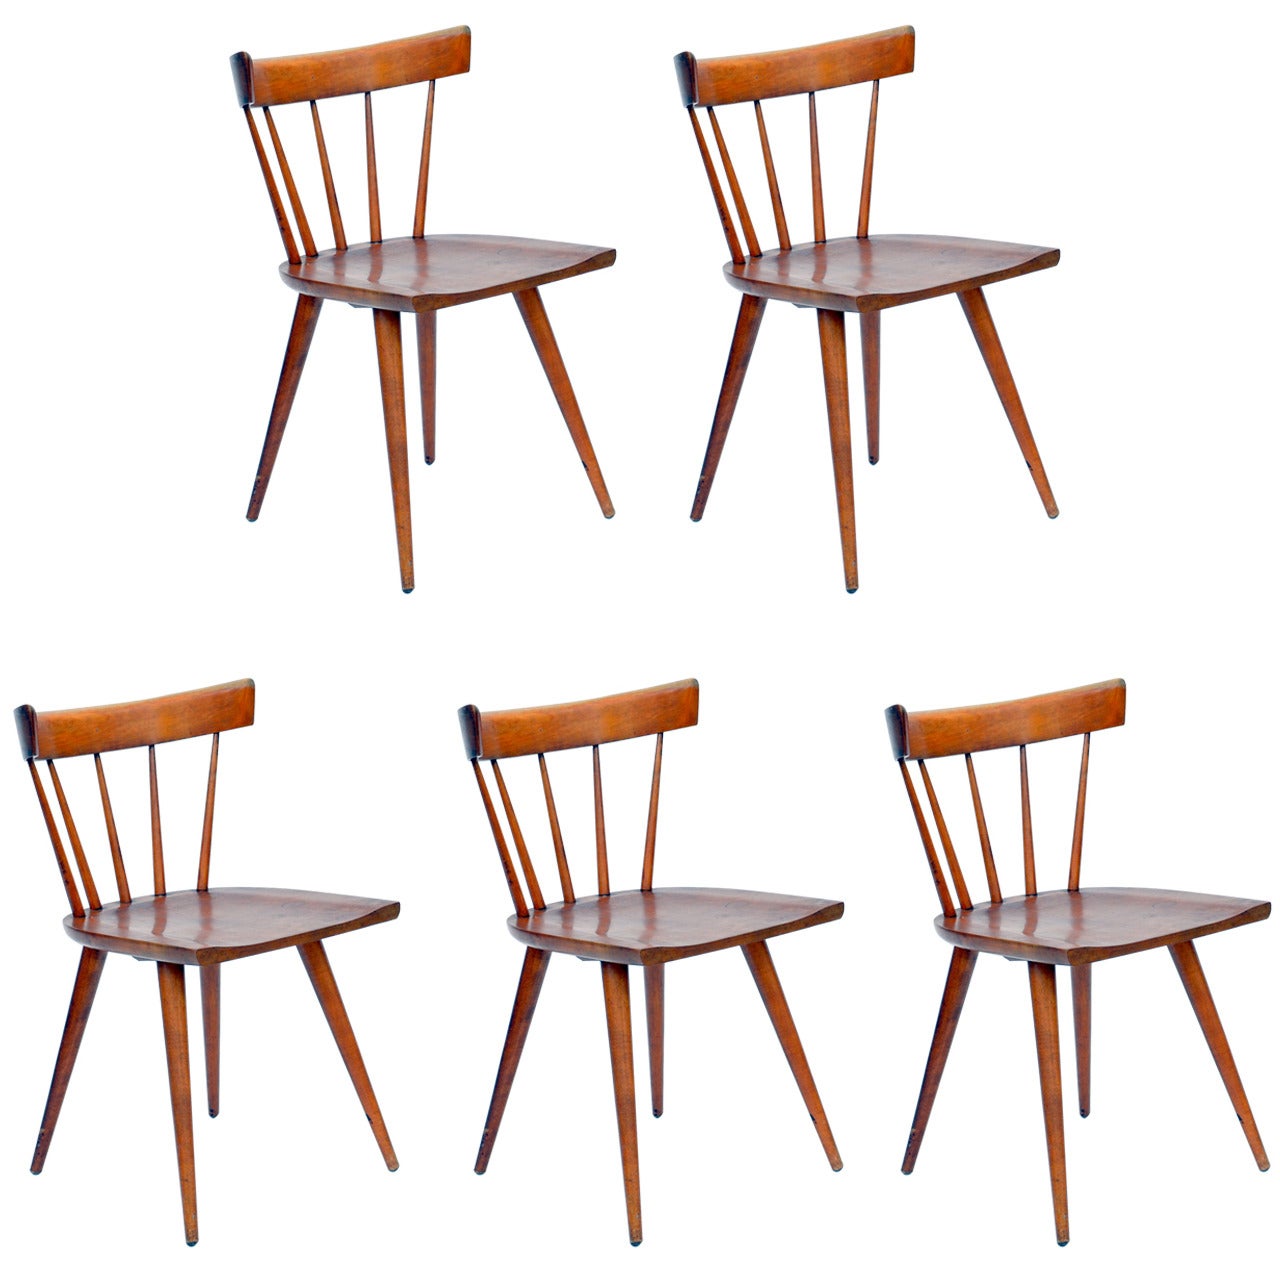 Set of Five Spindle Back Chairs by Paul McCobb